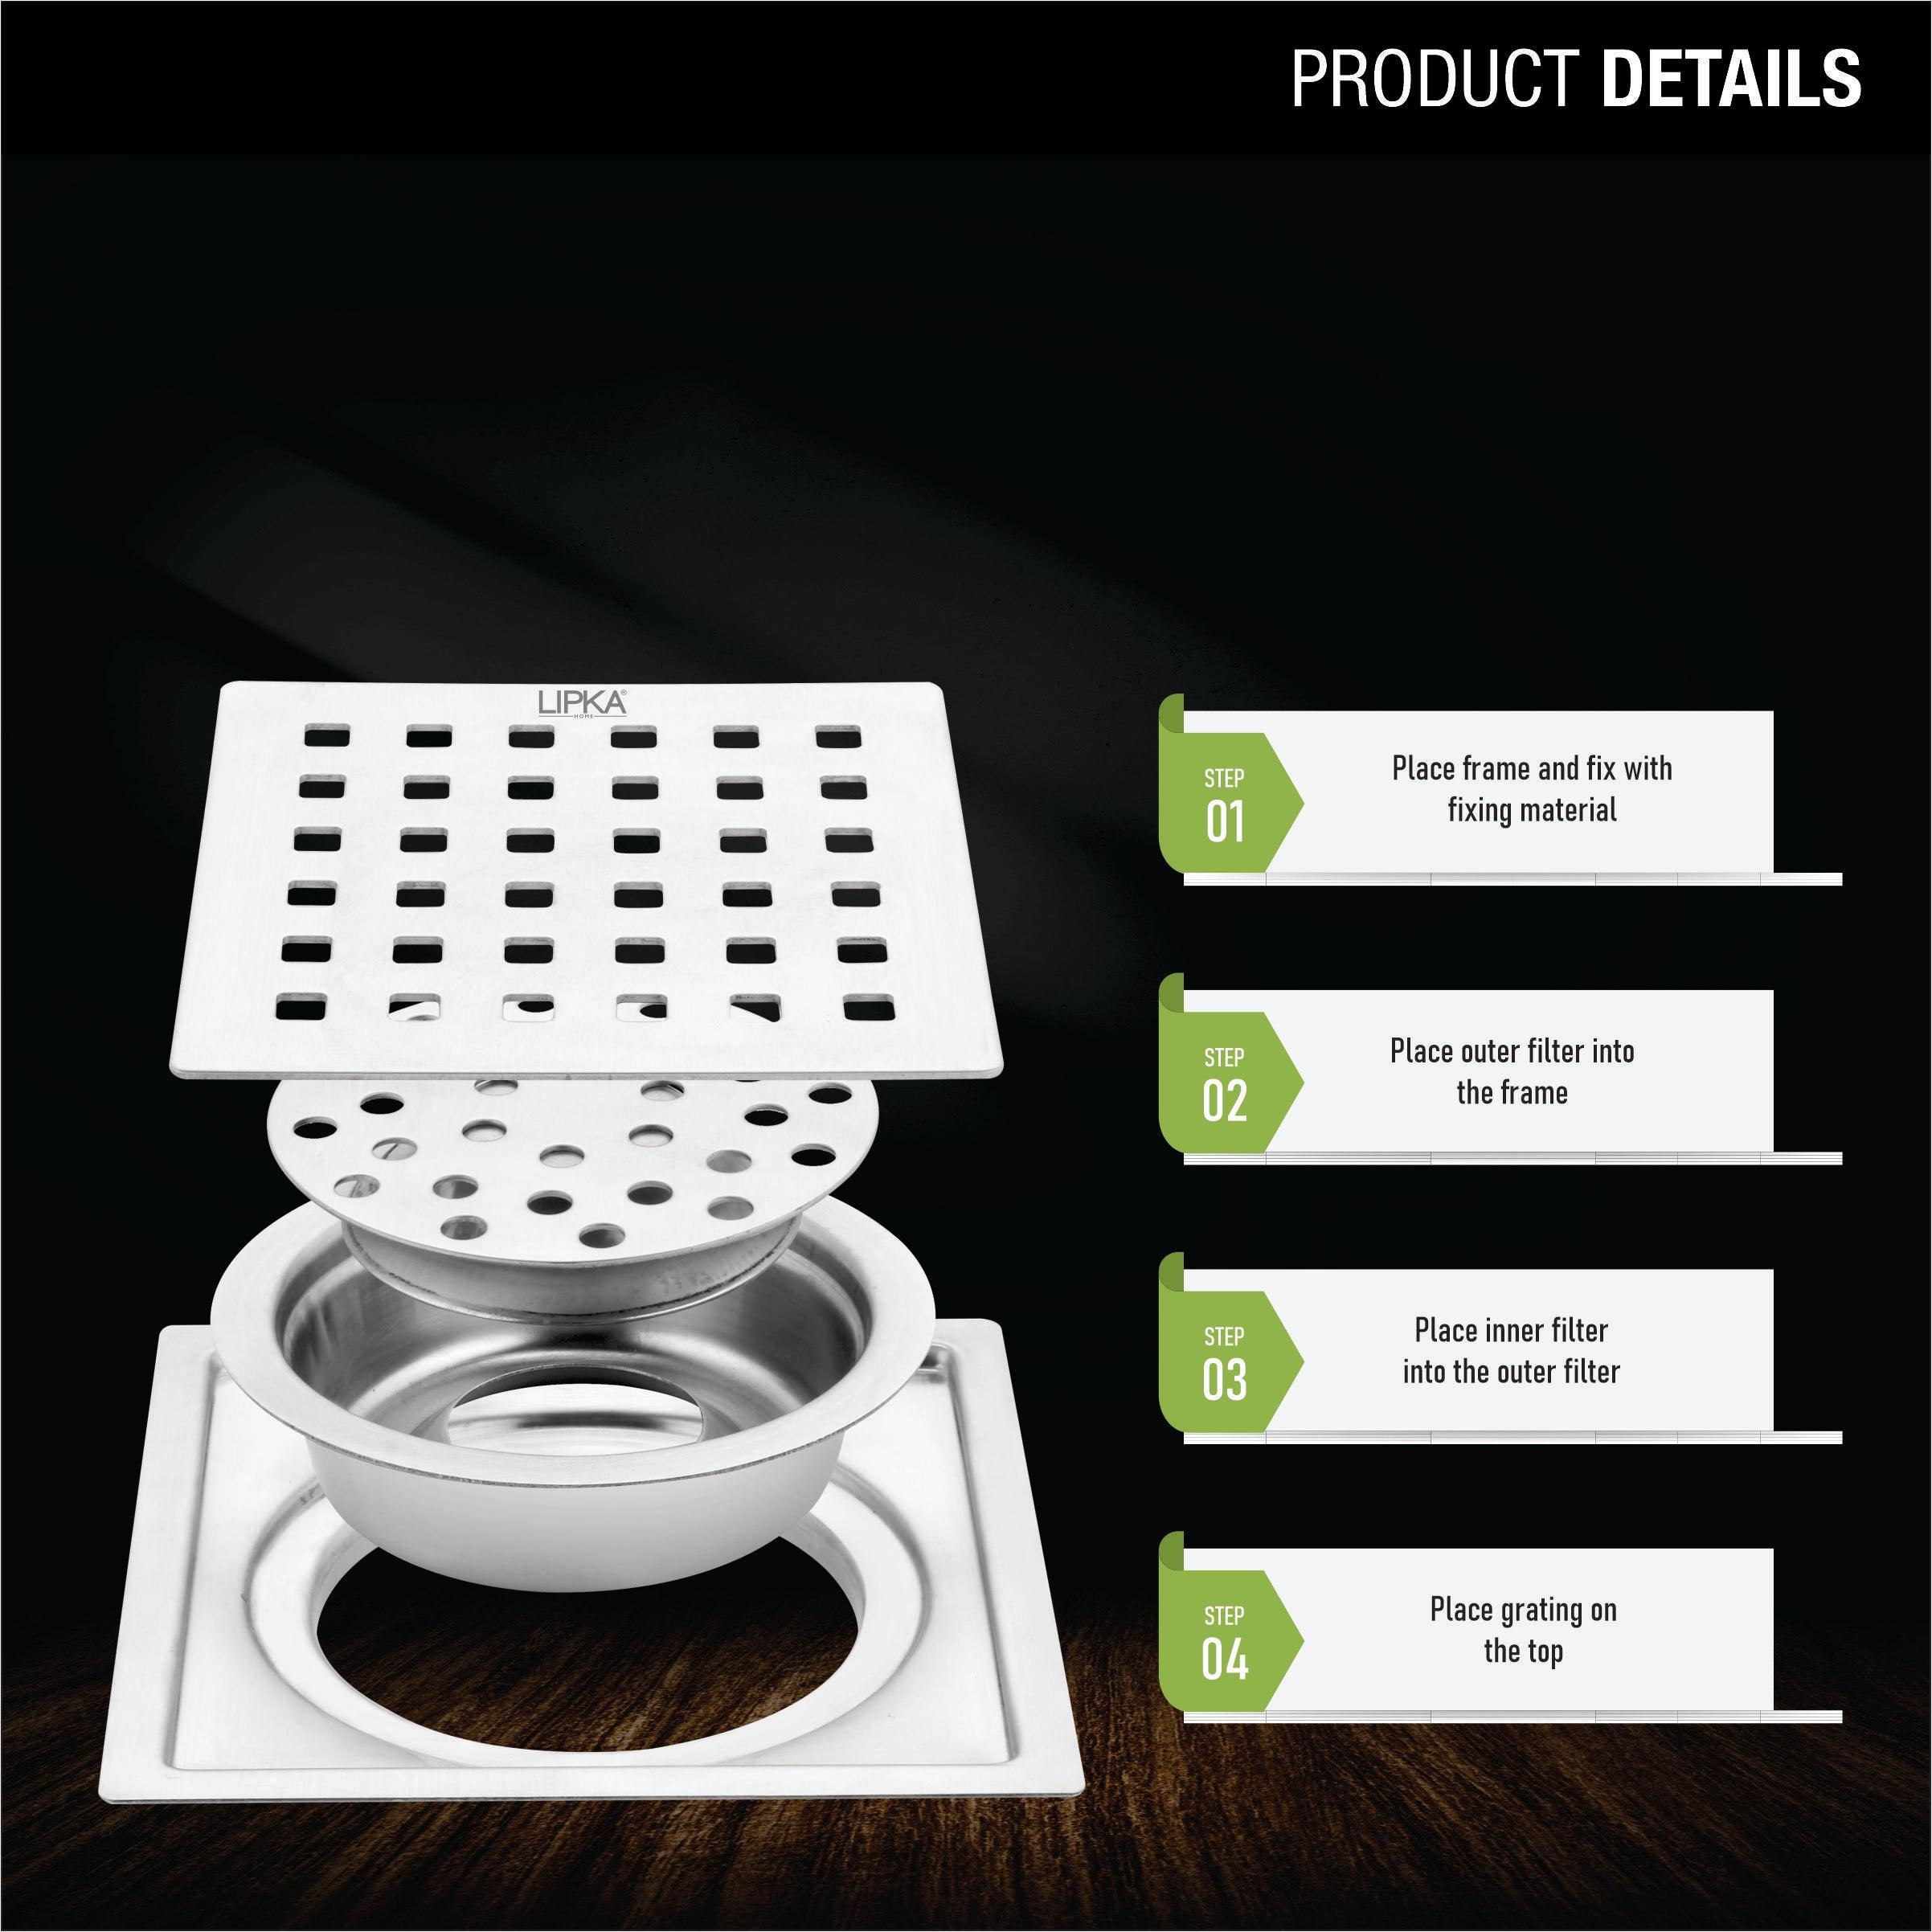 Red Exclusive Square Flat Cut Floor Drain (6 x 6 Inches) with Cockroach Trap product details